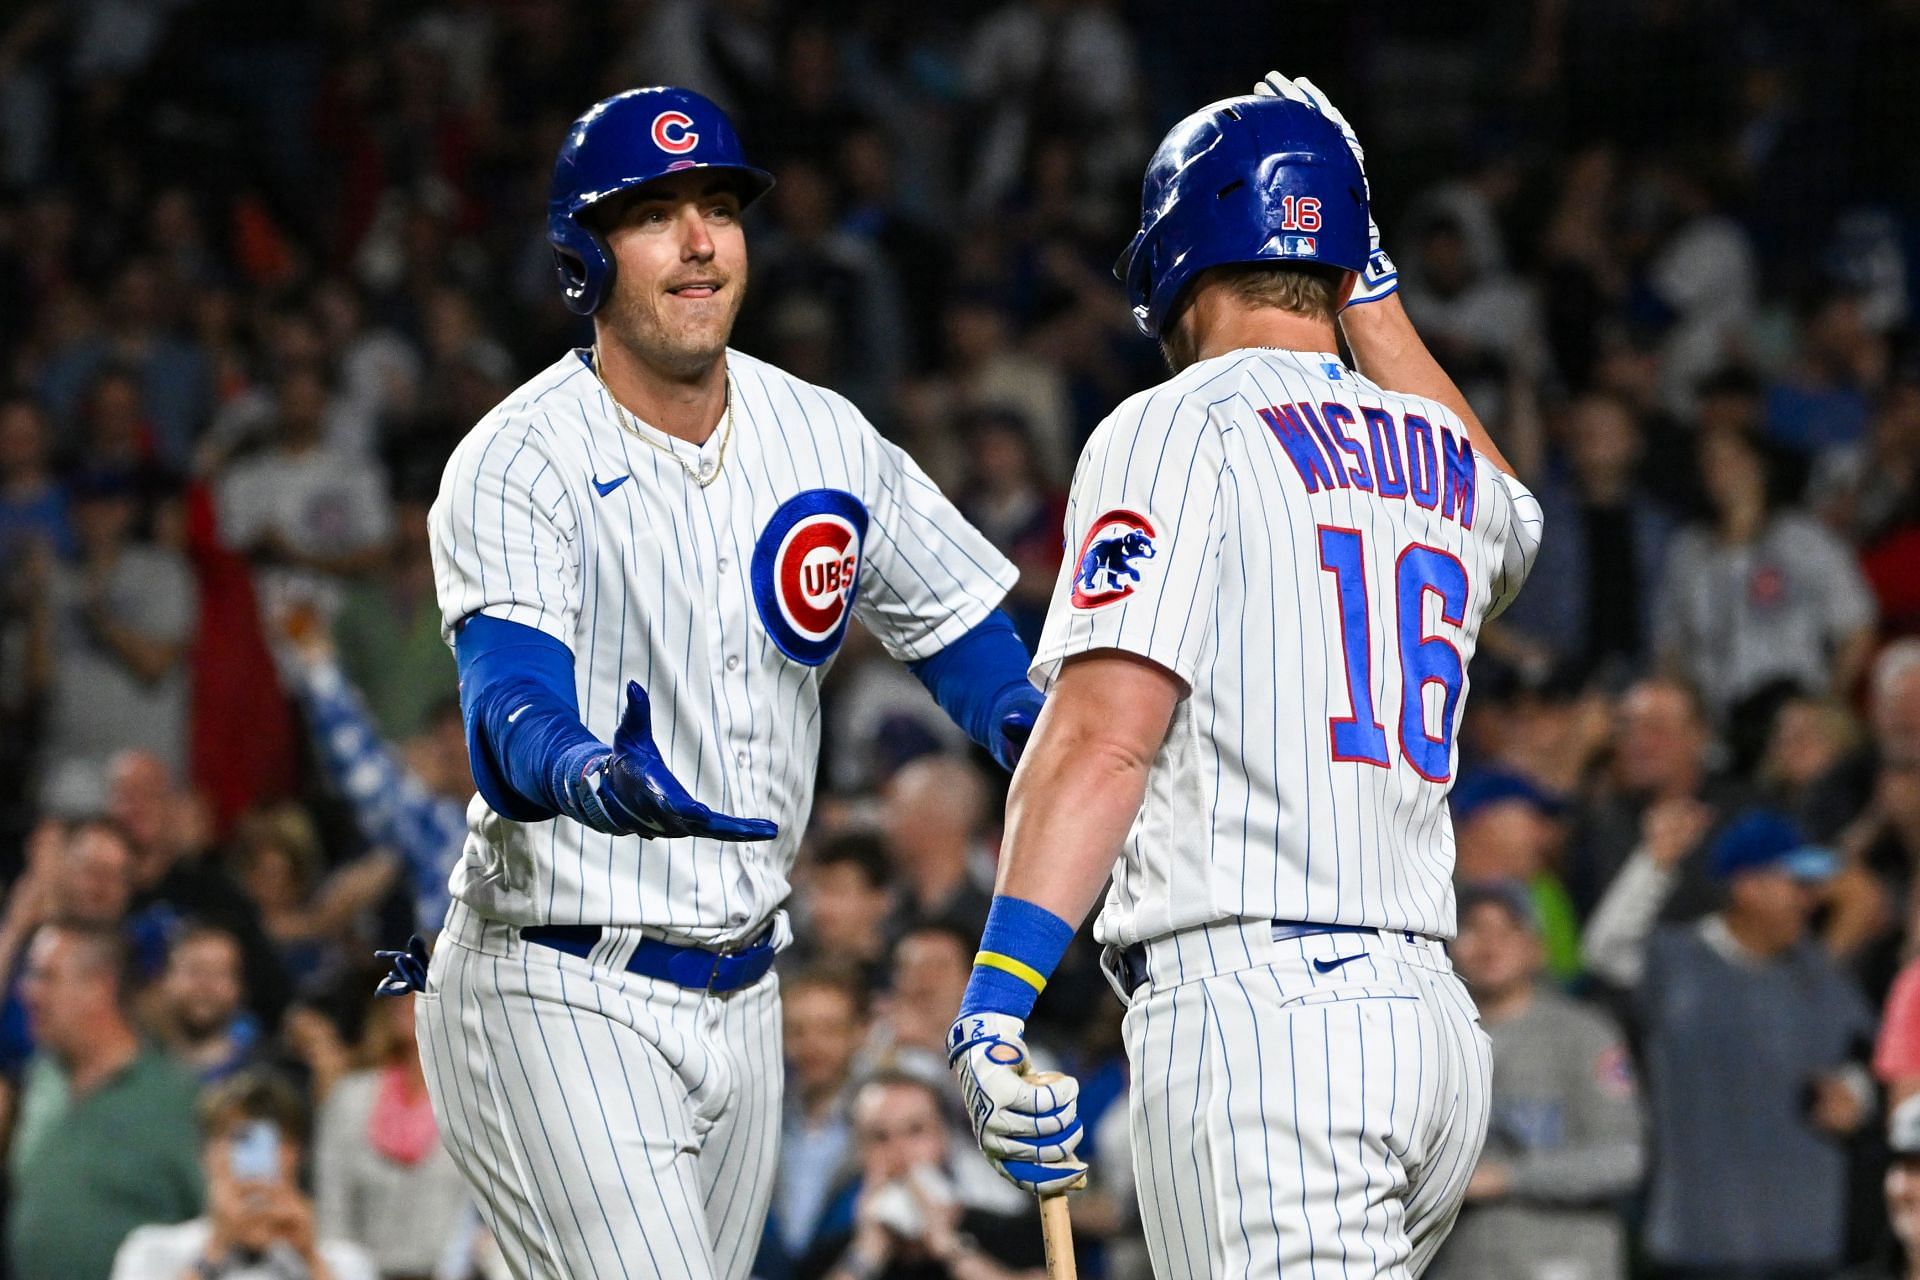 Cody Bellinger is the Giga Chad of Major League Baseball. Whether the cubs  have a good season or not, Bellinger will always make it more exciting. 35  home runs here we come 